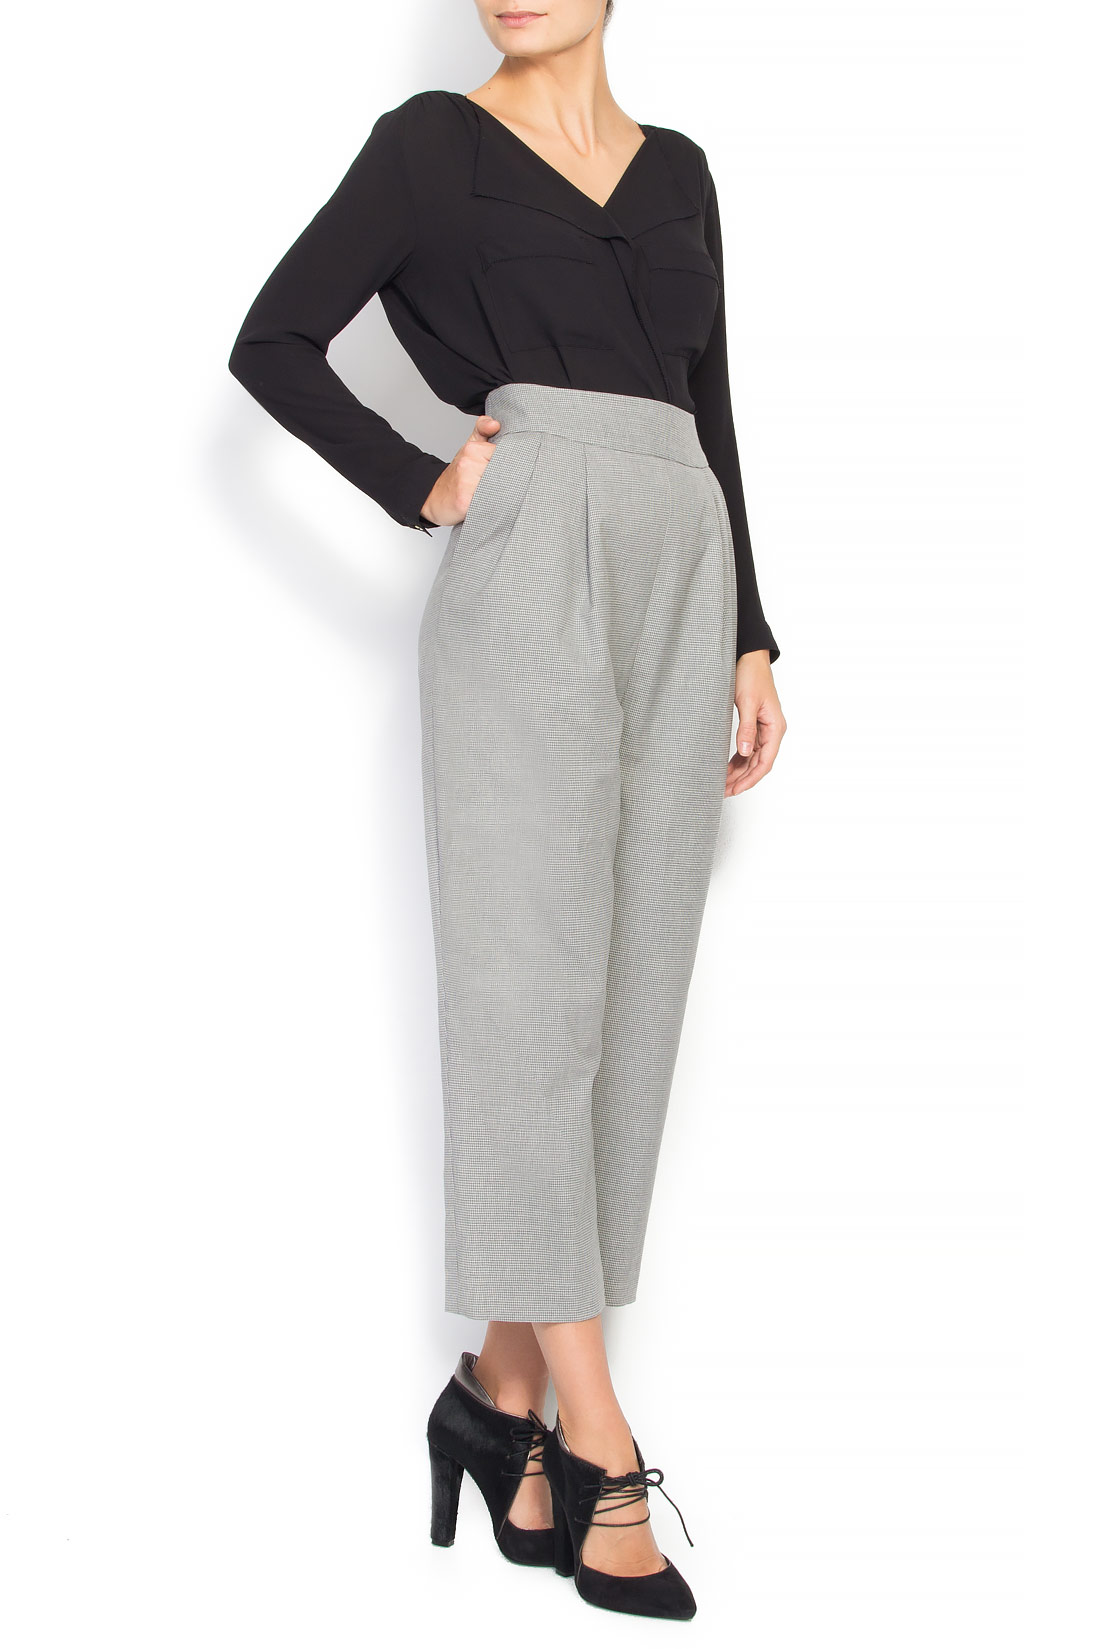 Houndstooth cotton-blend tapered pants Claudia Castrase image 0